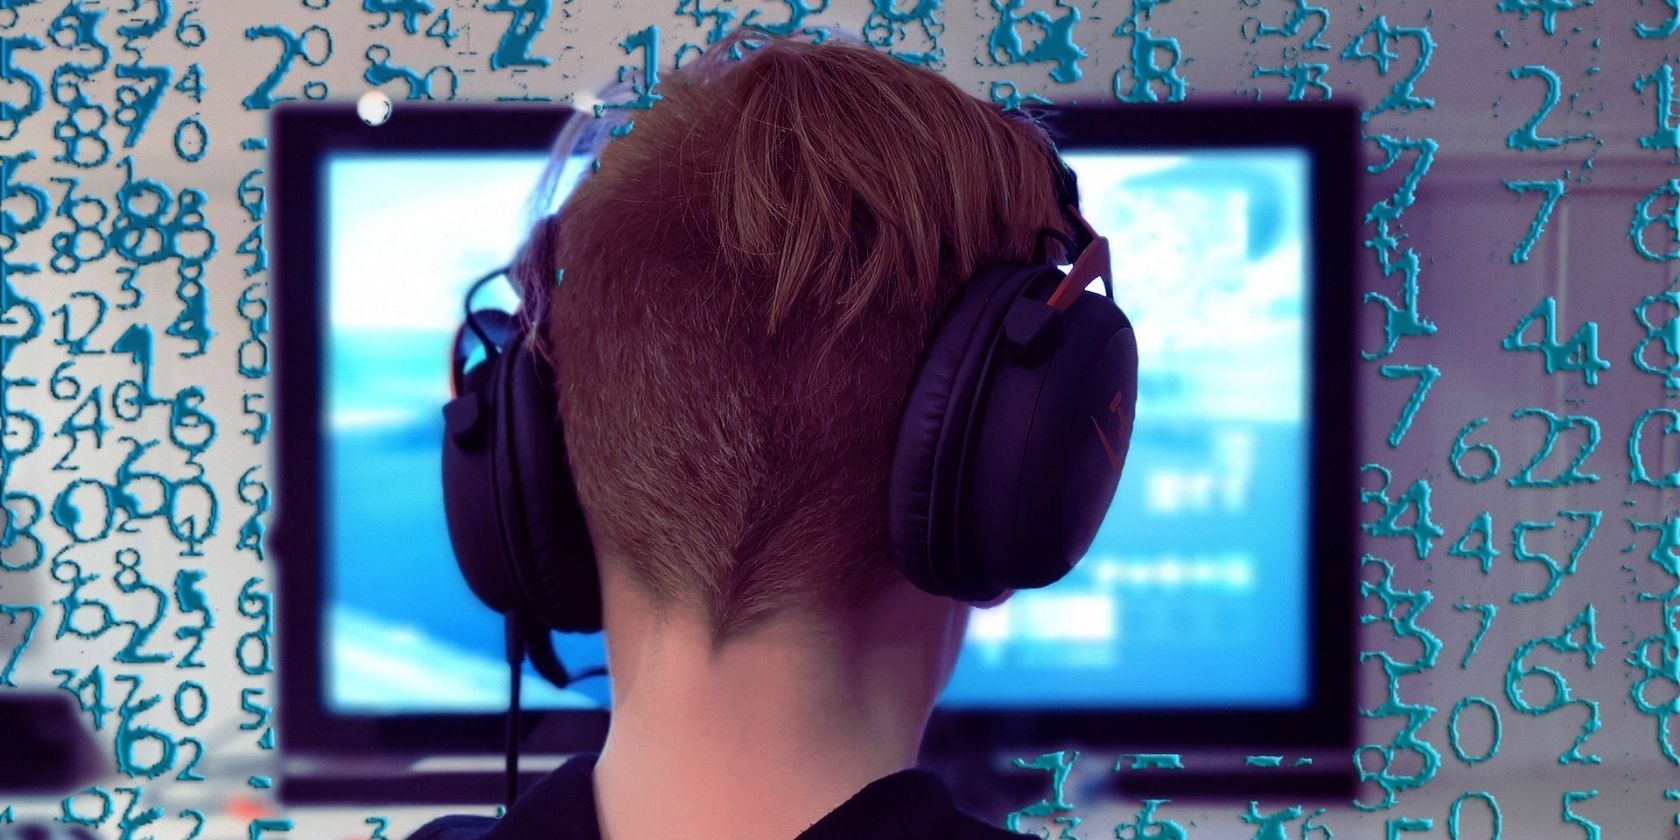 A person playing in a game while wearing headphones.